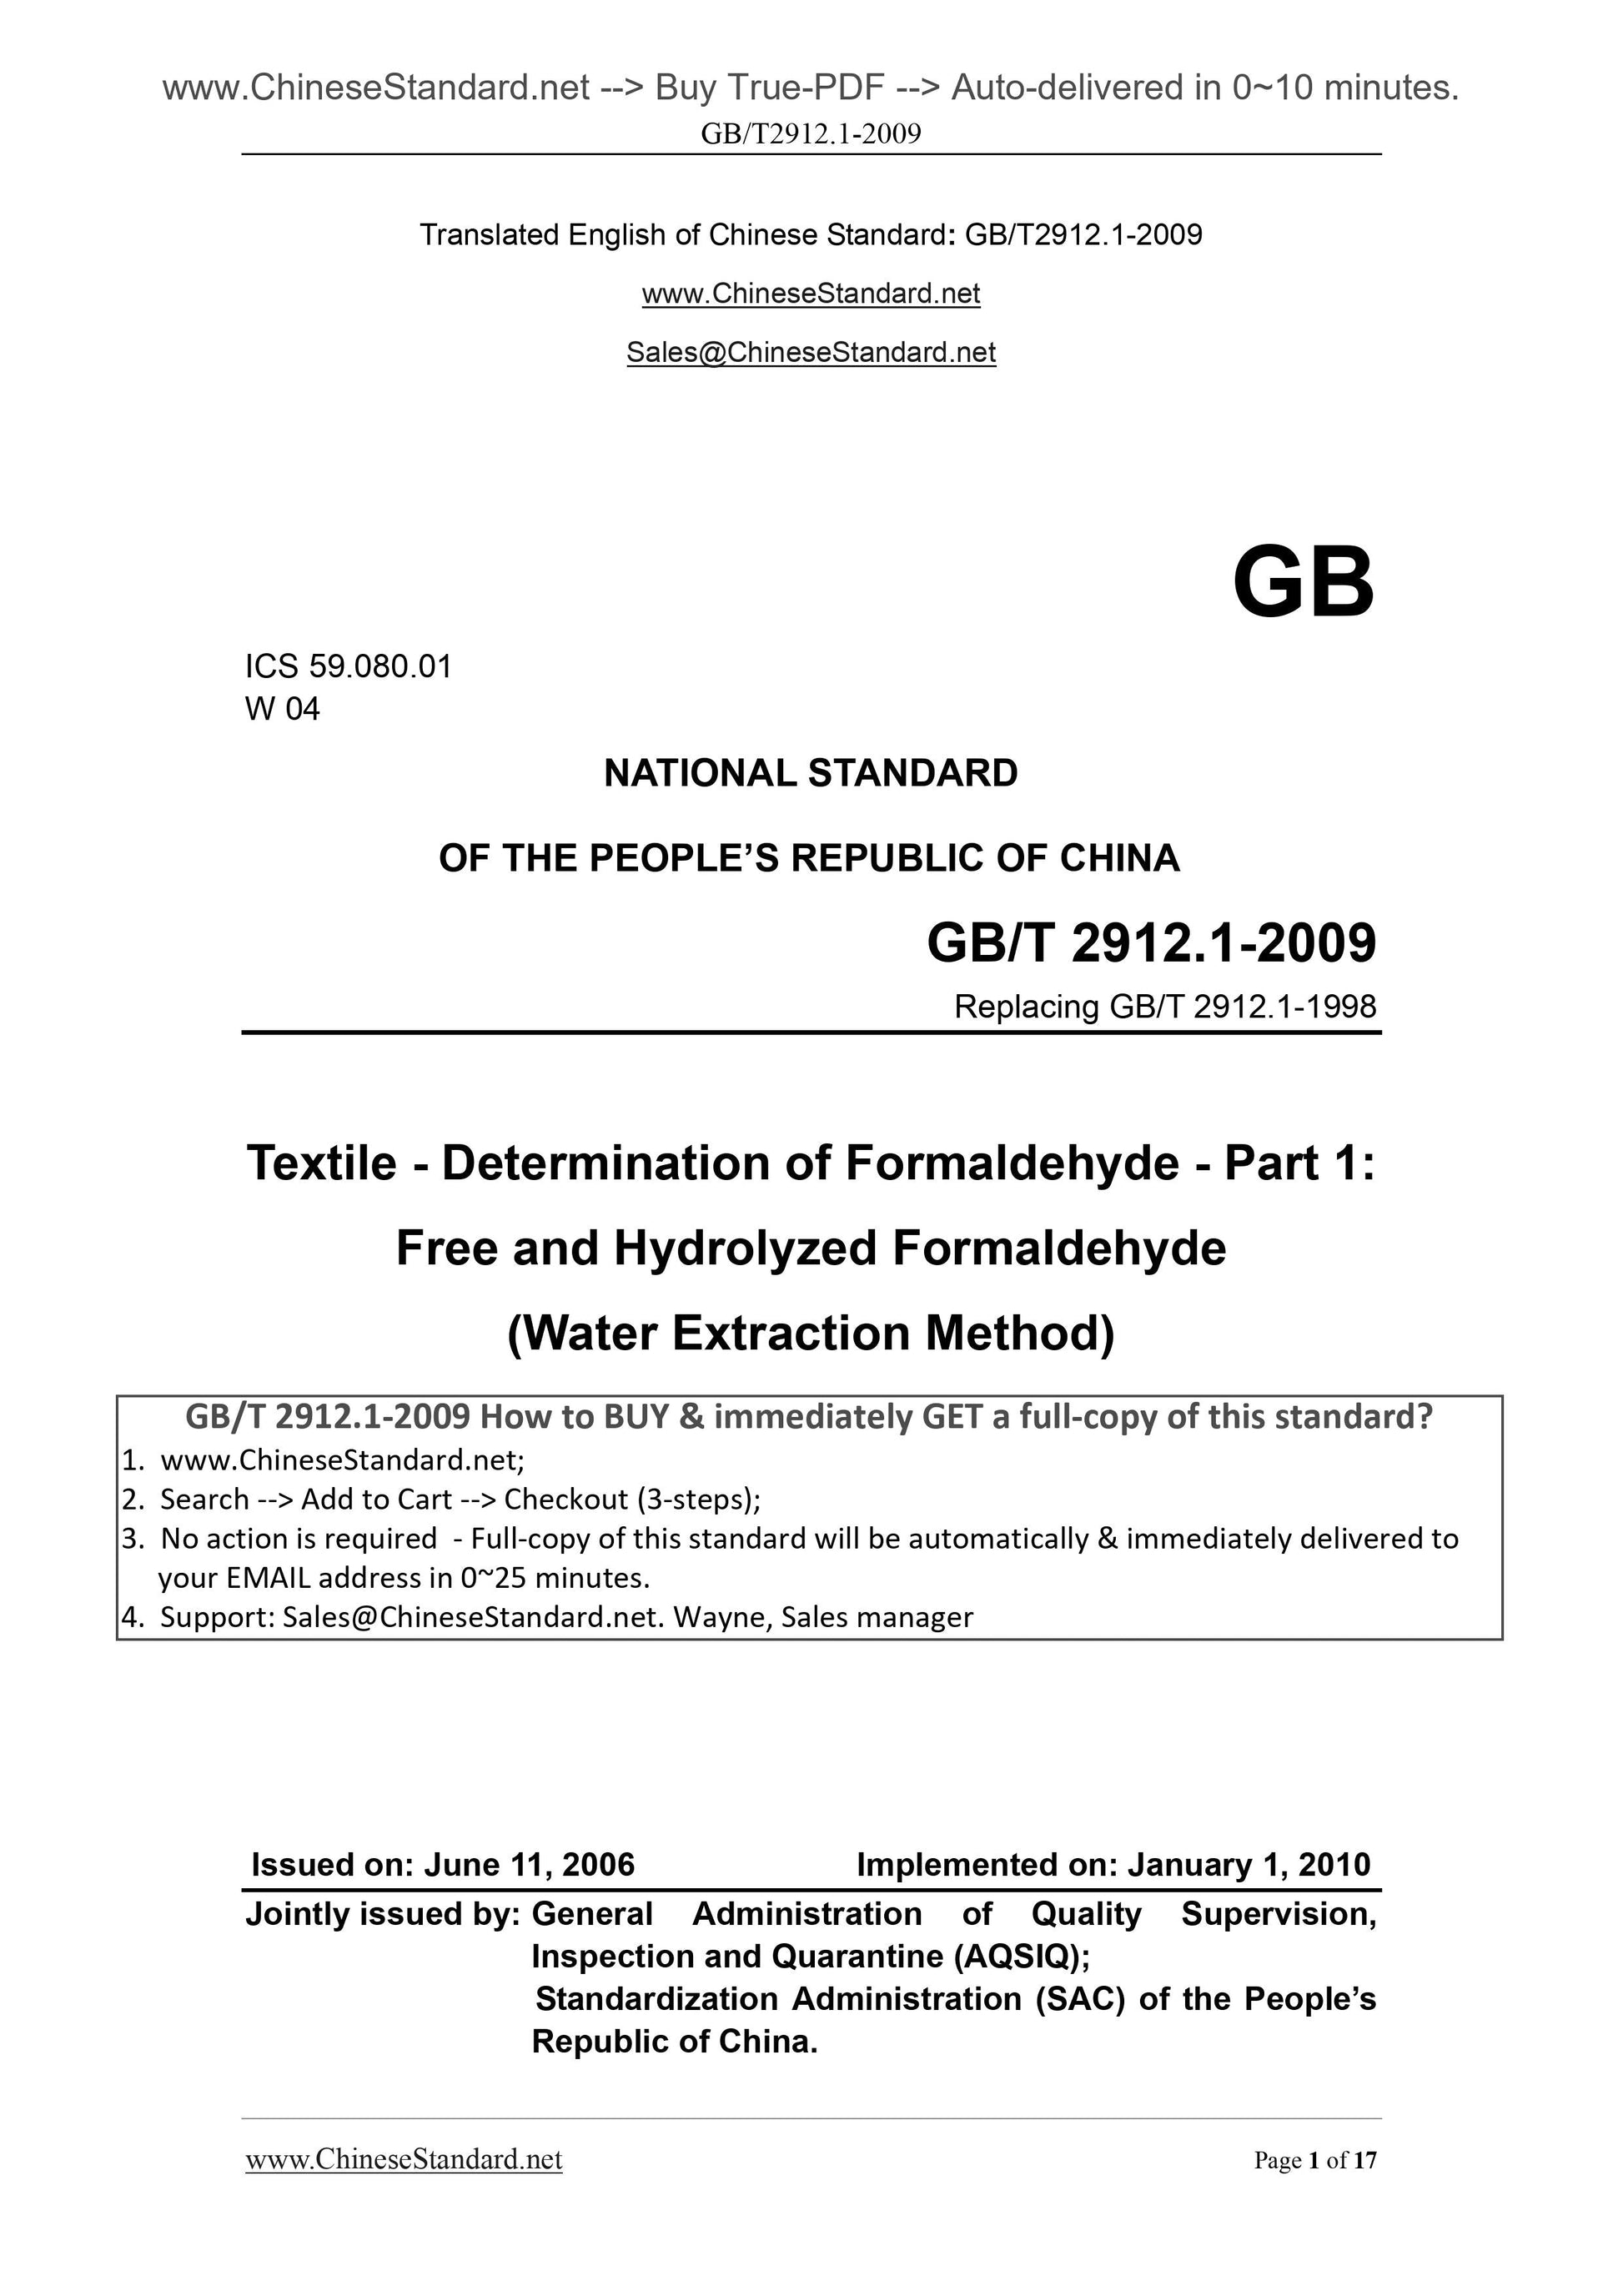 GB/T 2912.1-2009 Page 1